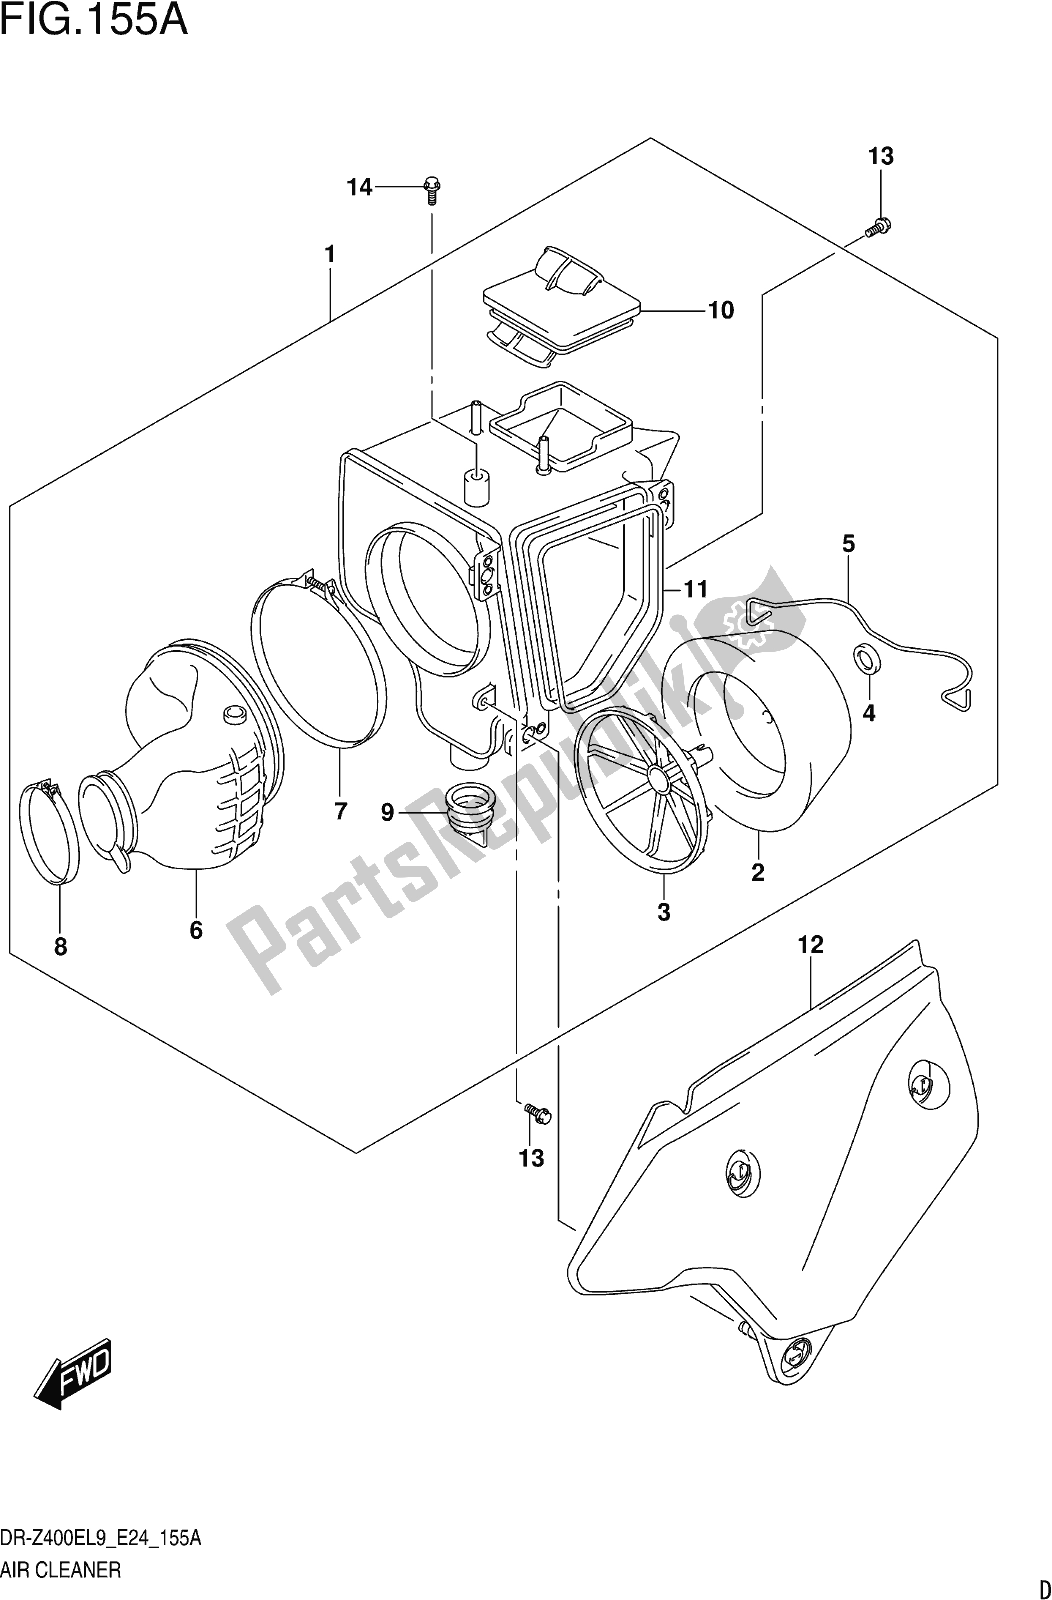 All parts for the Fig. 155a Air Cleaner of the Suzuki DR-Z 400E 2019